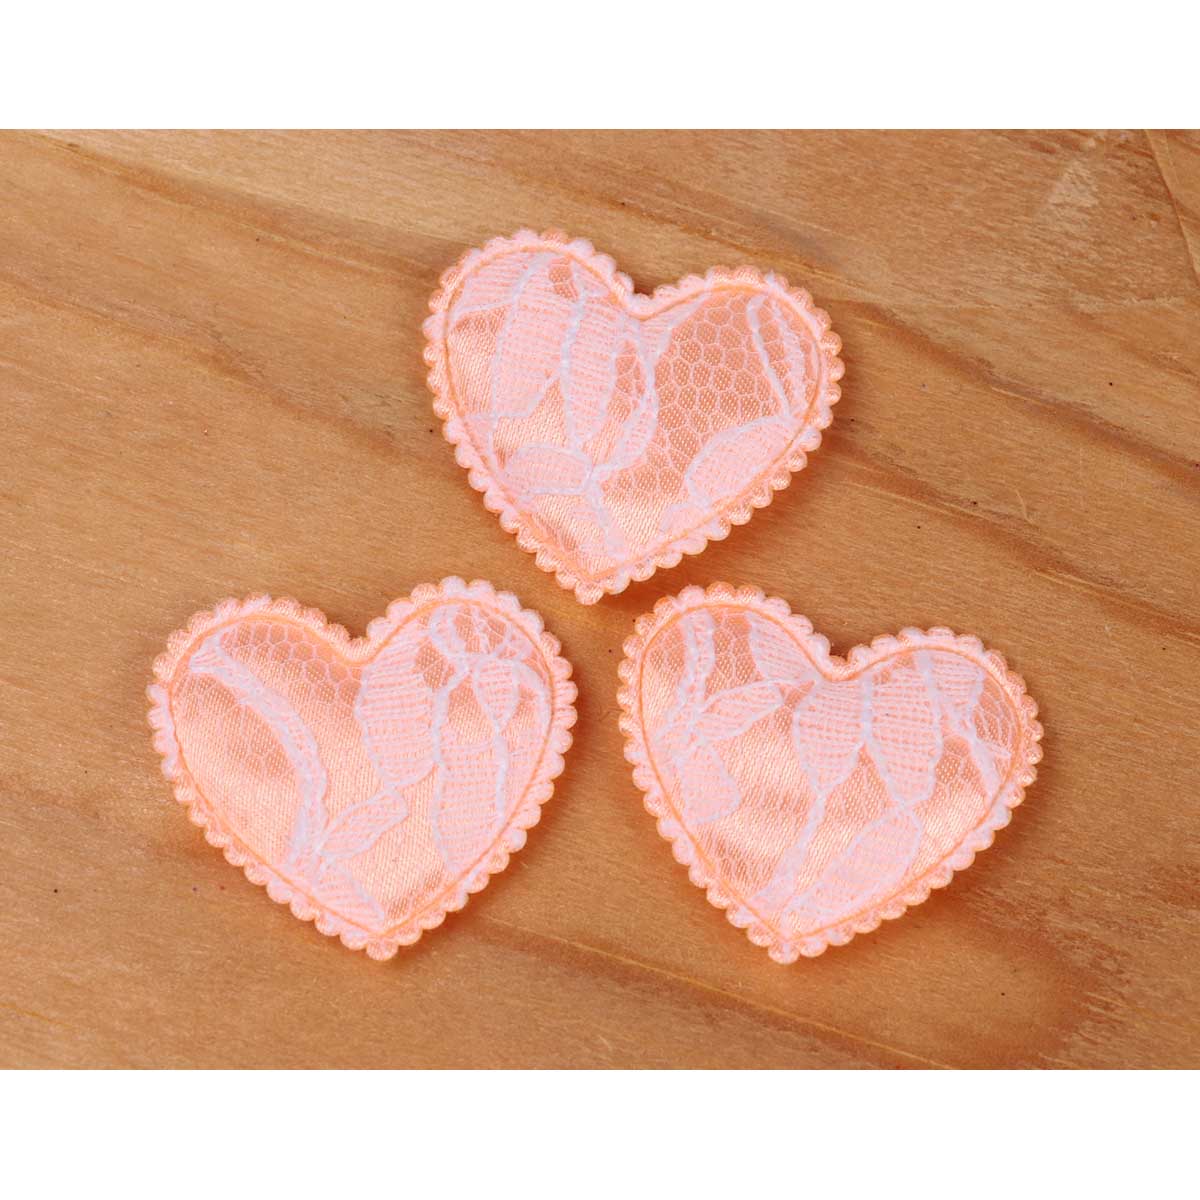 50 Padded Lace Heart Appliques 1.5″-Peach